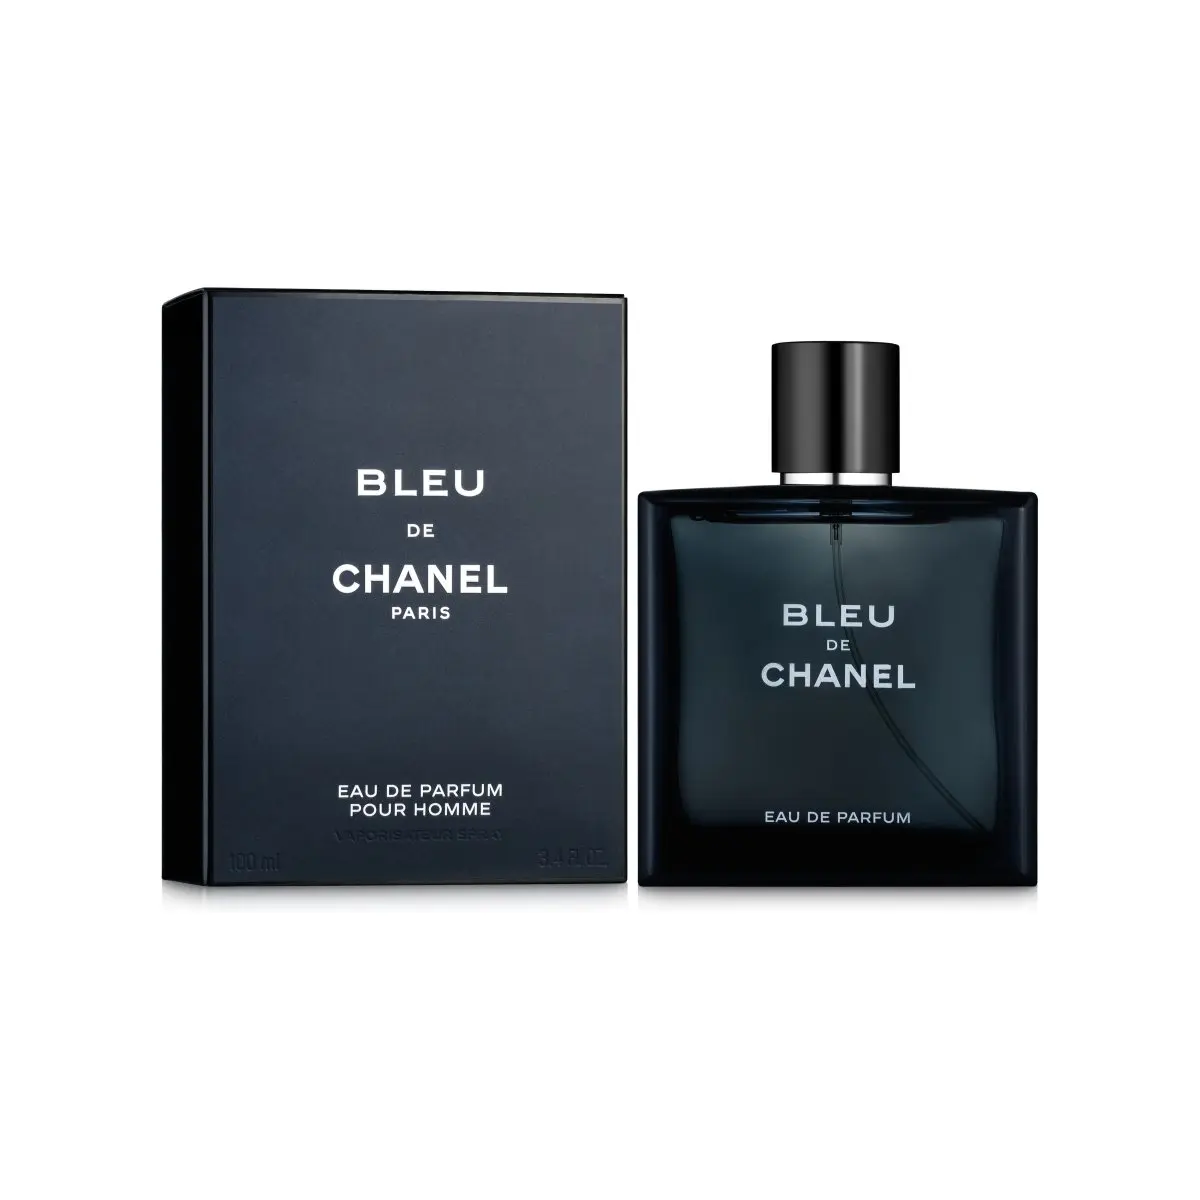 Perfume factory concentrate. Sanel Allure Homme Sport is a